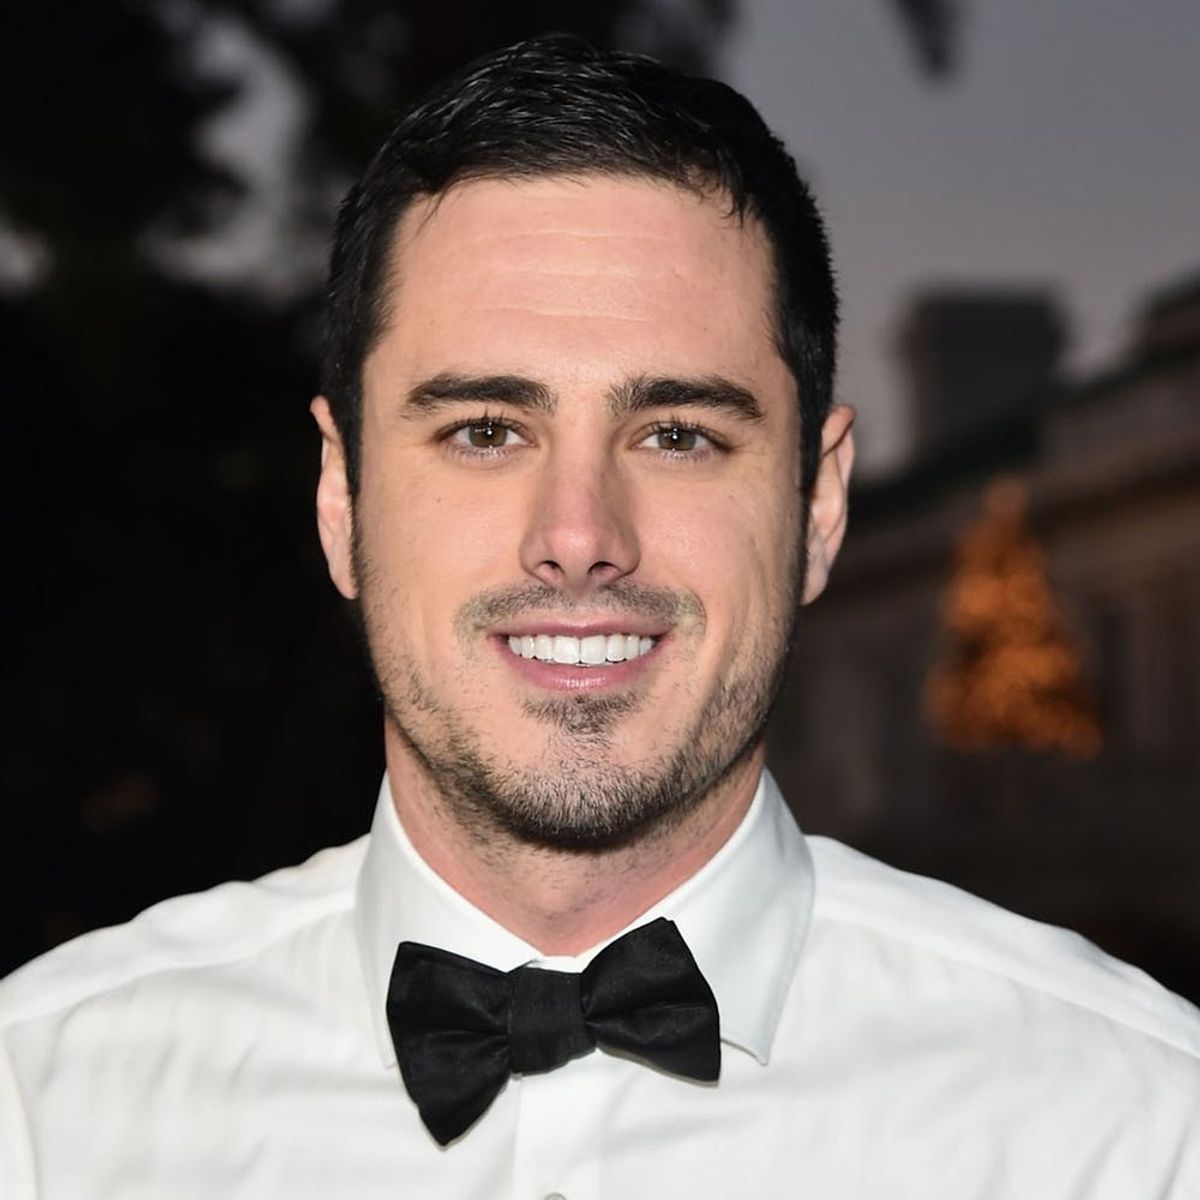 Why We Love Ben Higgins So Much, According to Science